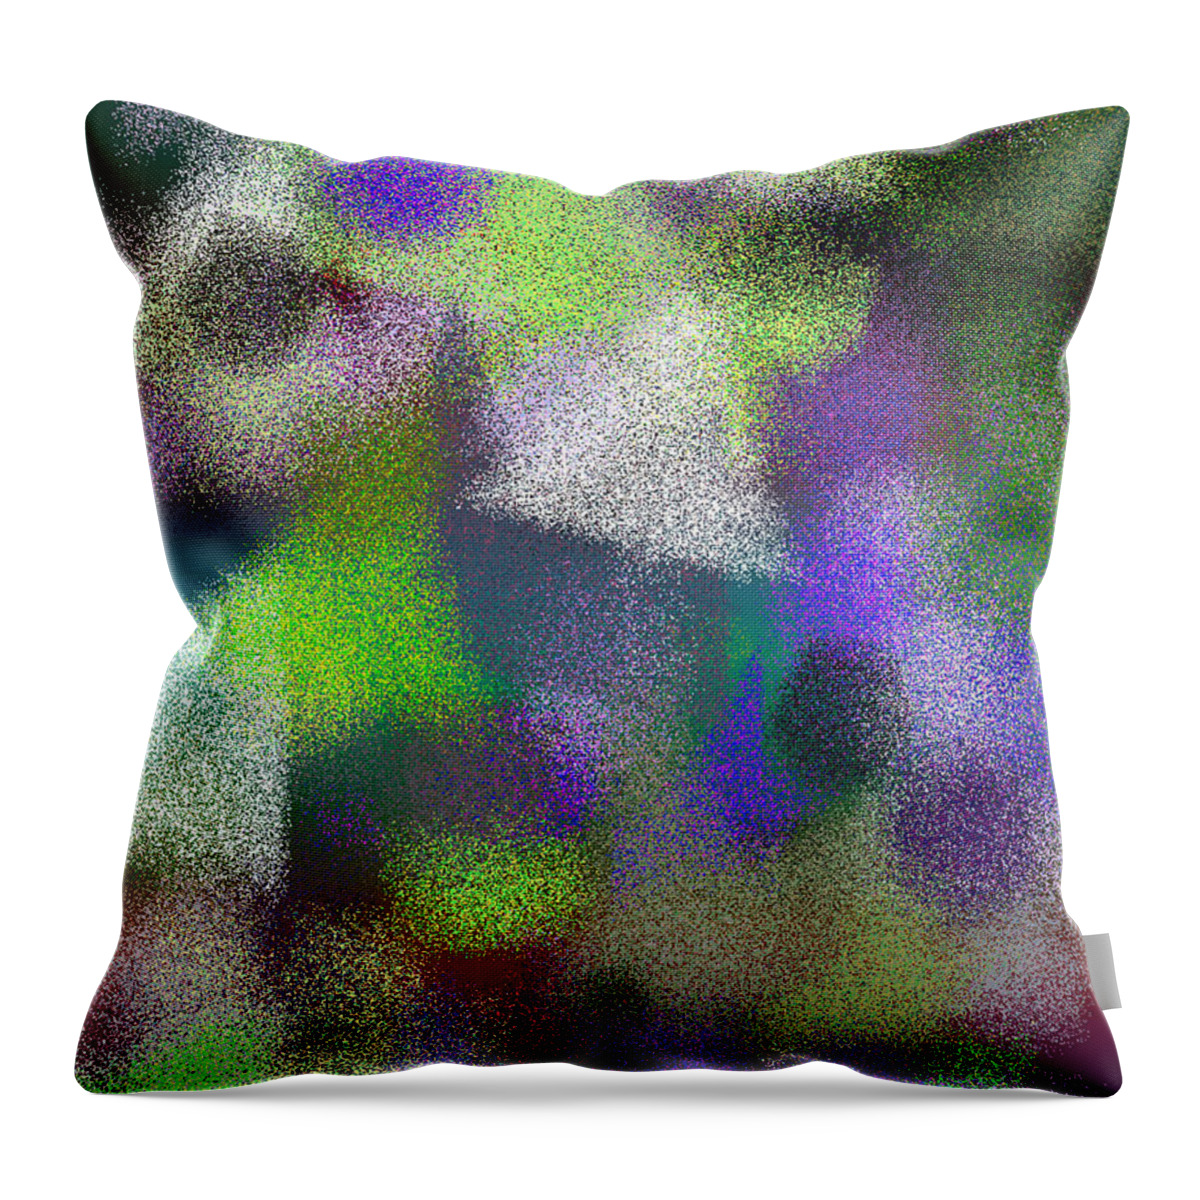 Abstract Throw Pillow featuring the digital art T.1.968.61.3x4.3840x5120 by Gareth Lewis